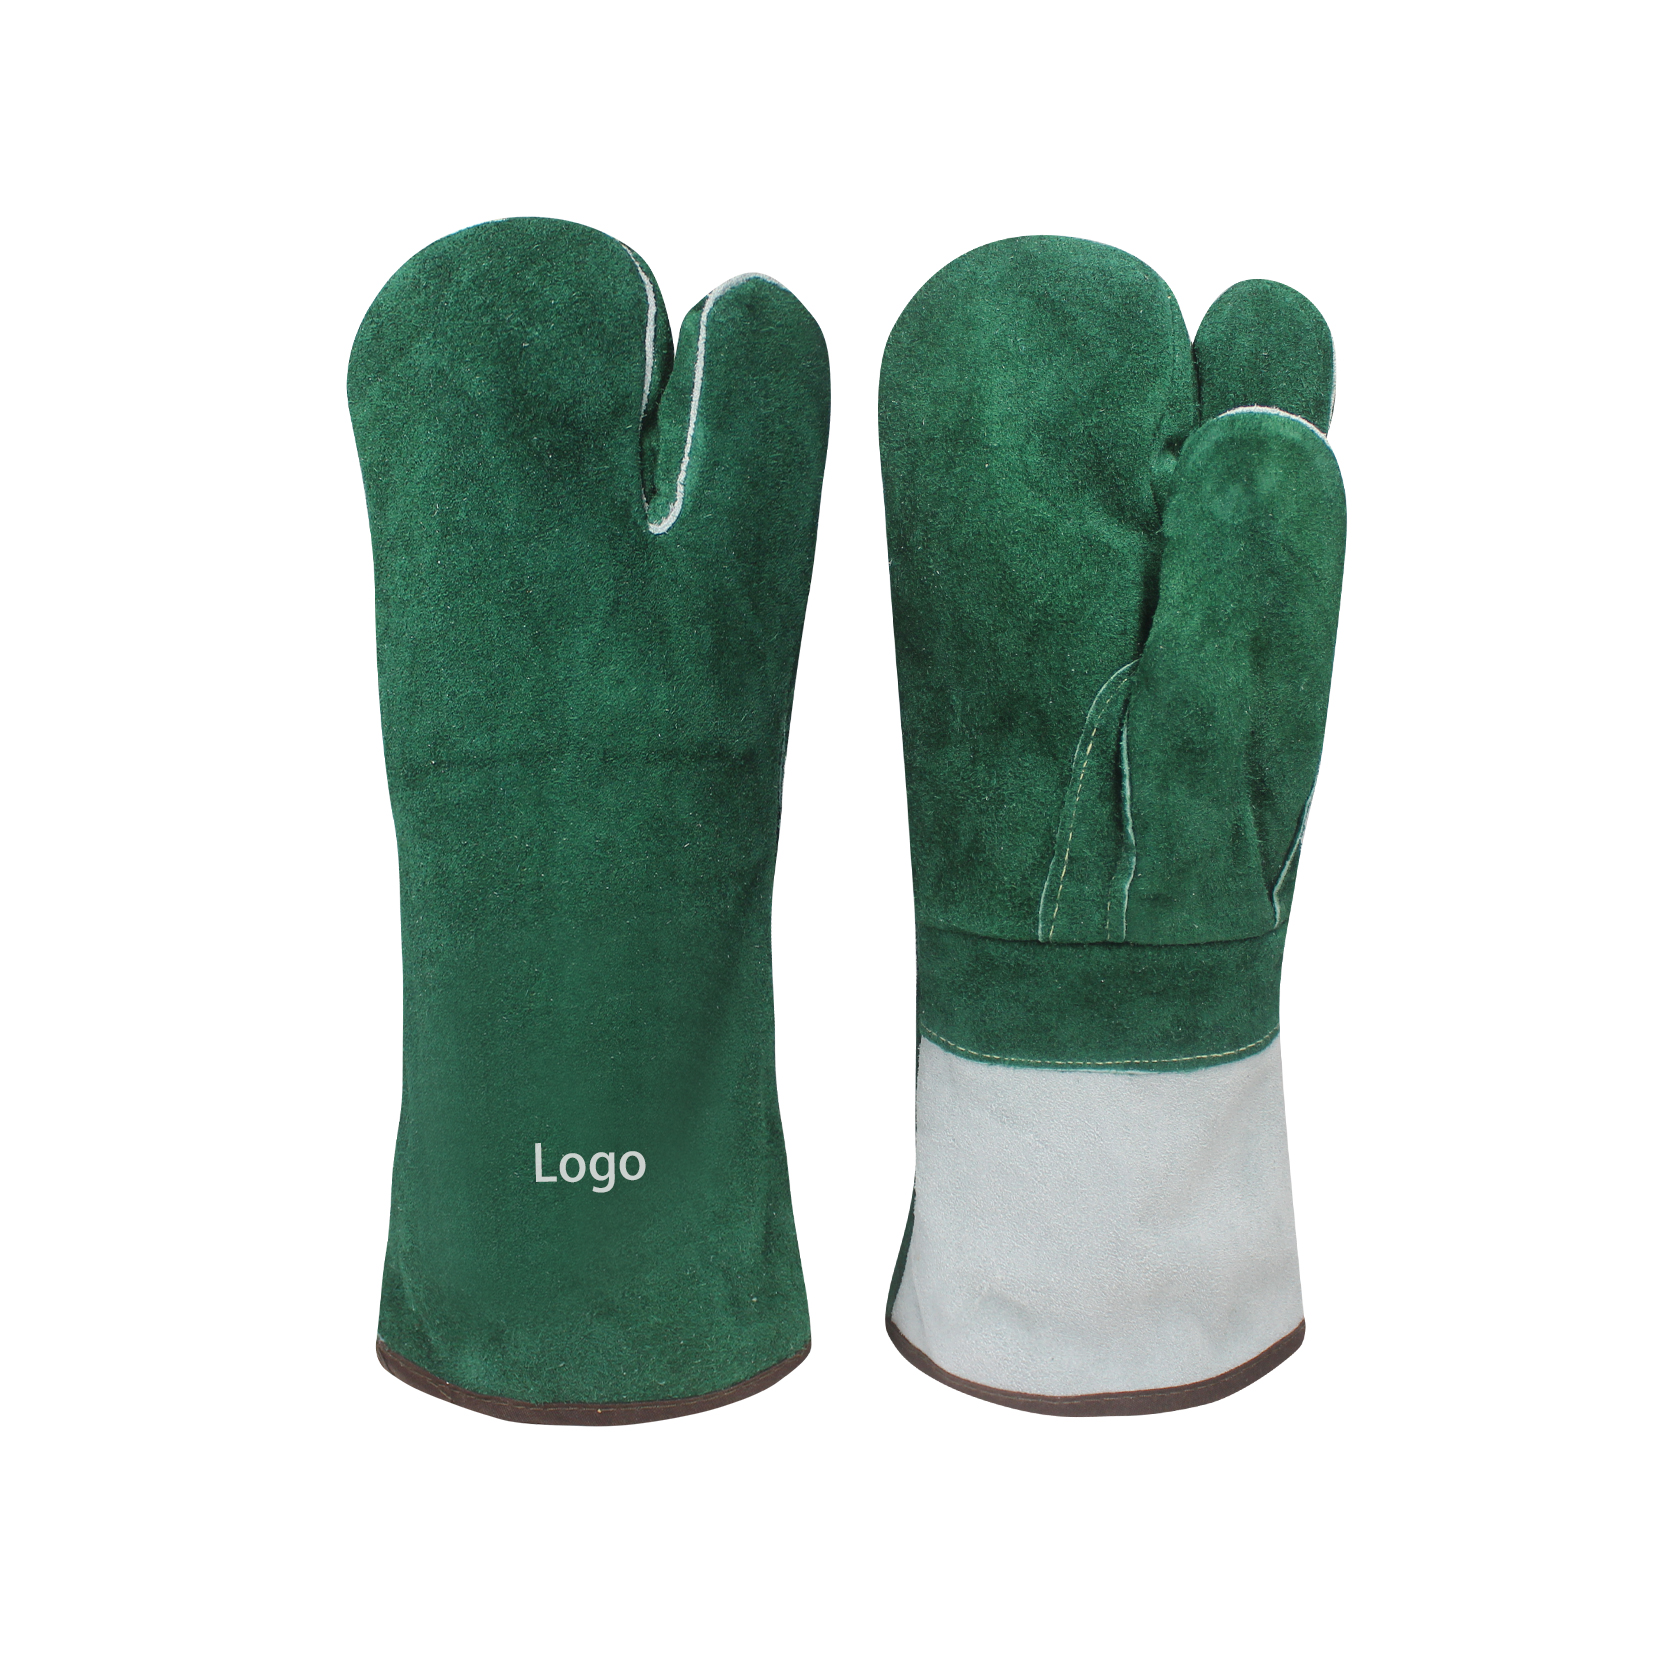 Leather Welding Gloves para sa Oven, Grill, Pot Holder, Tig , Mig, BBQ